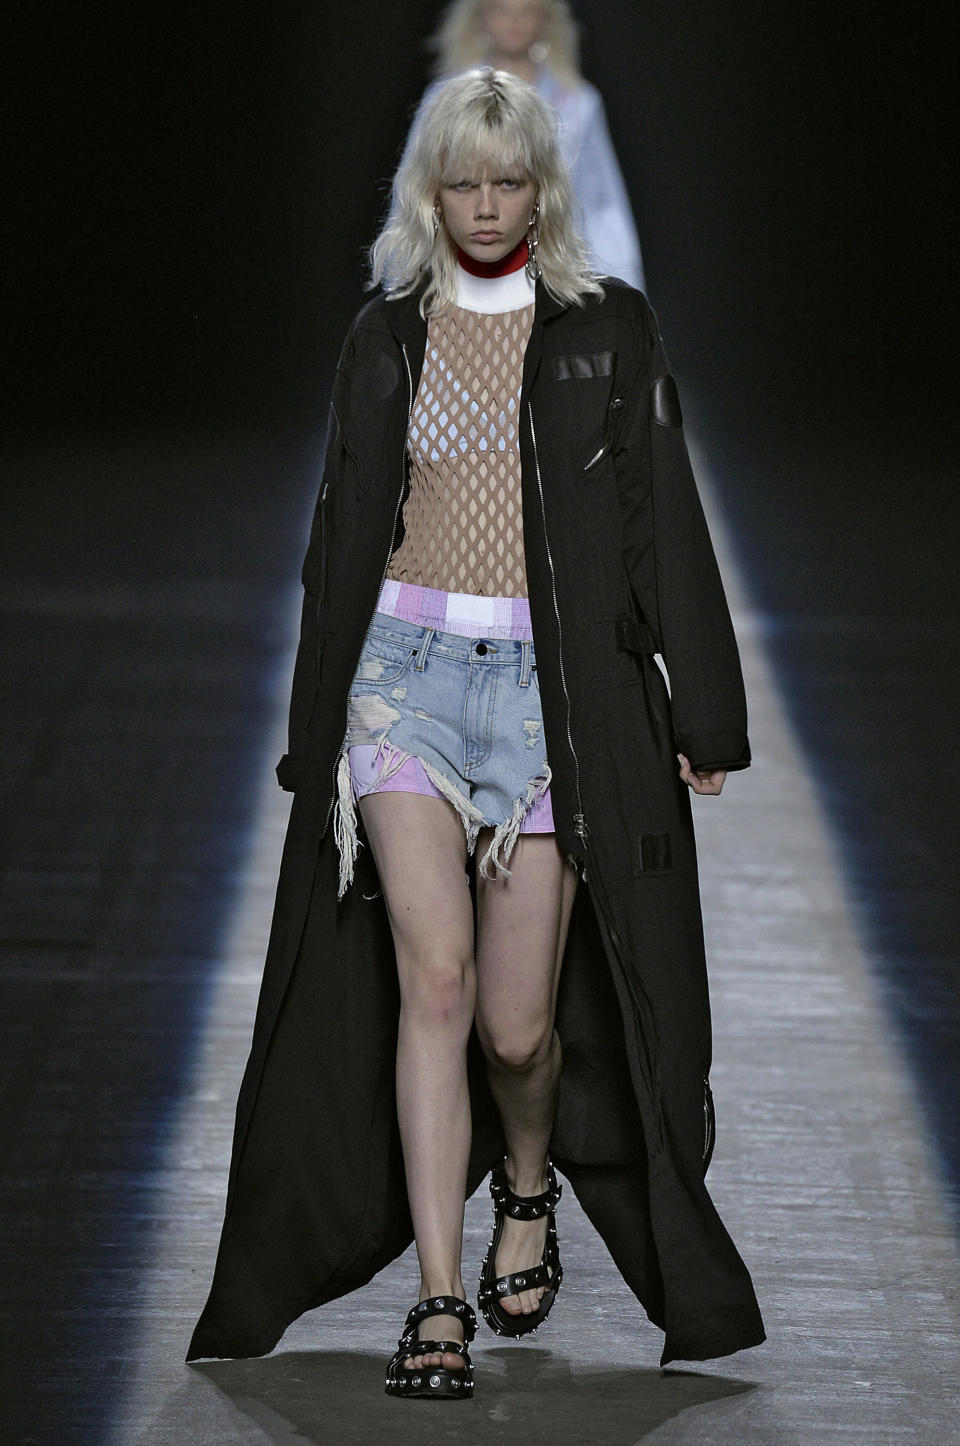 Alexander Wang Spring-Summer Collection 2016 at New York Fashion Week (Photo: Getty Images)